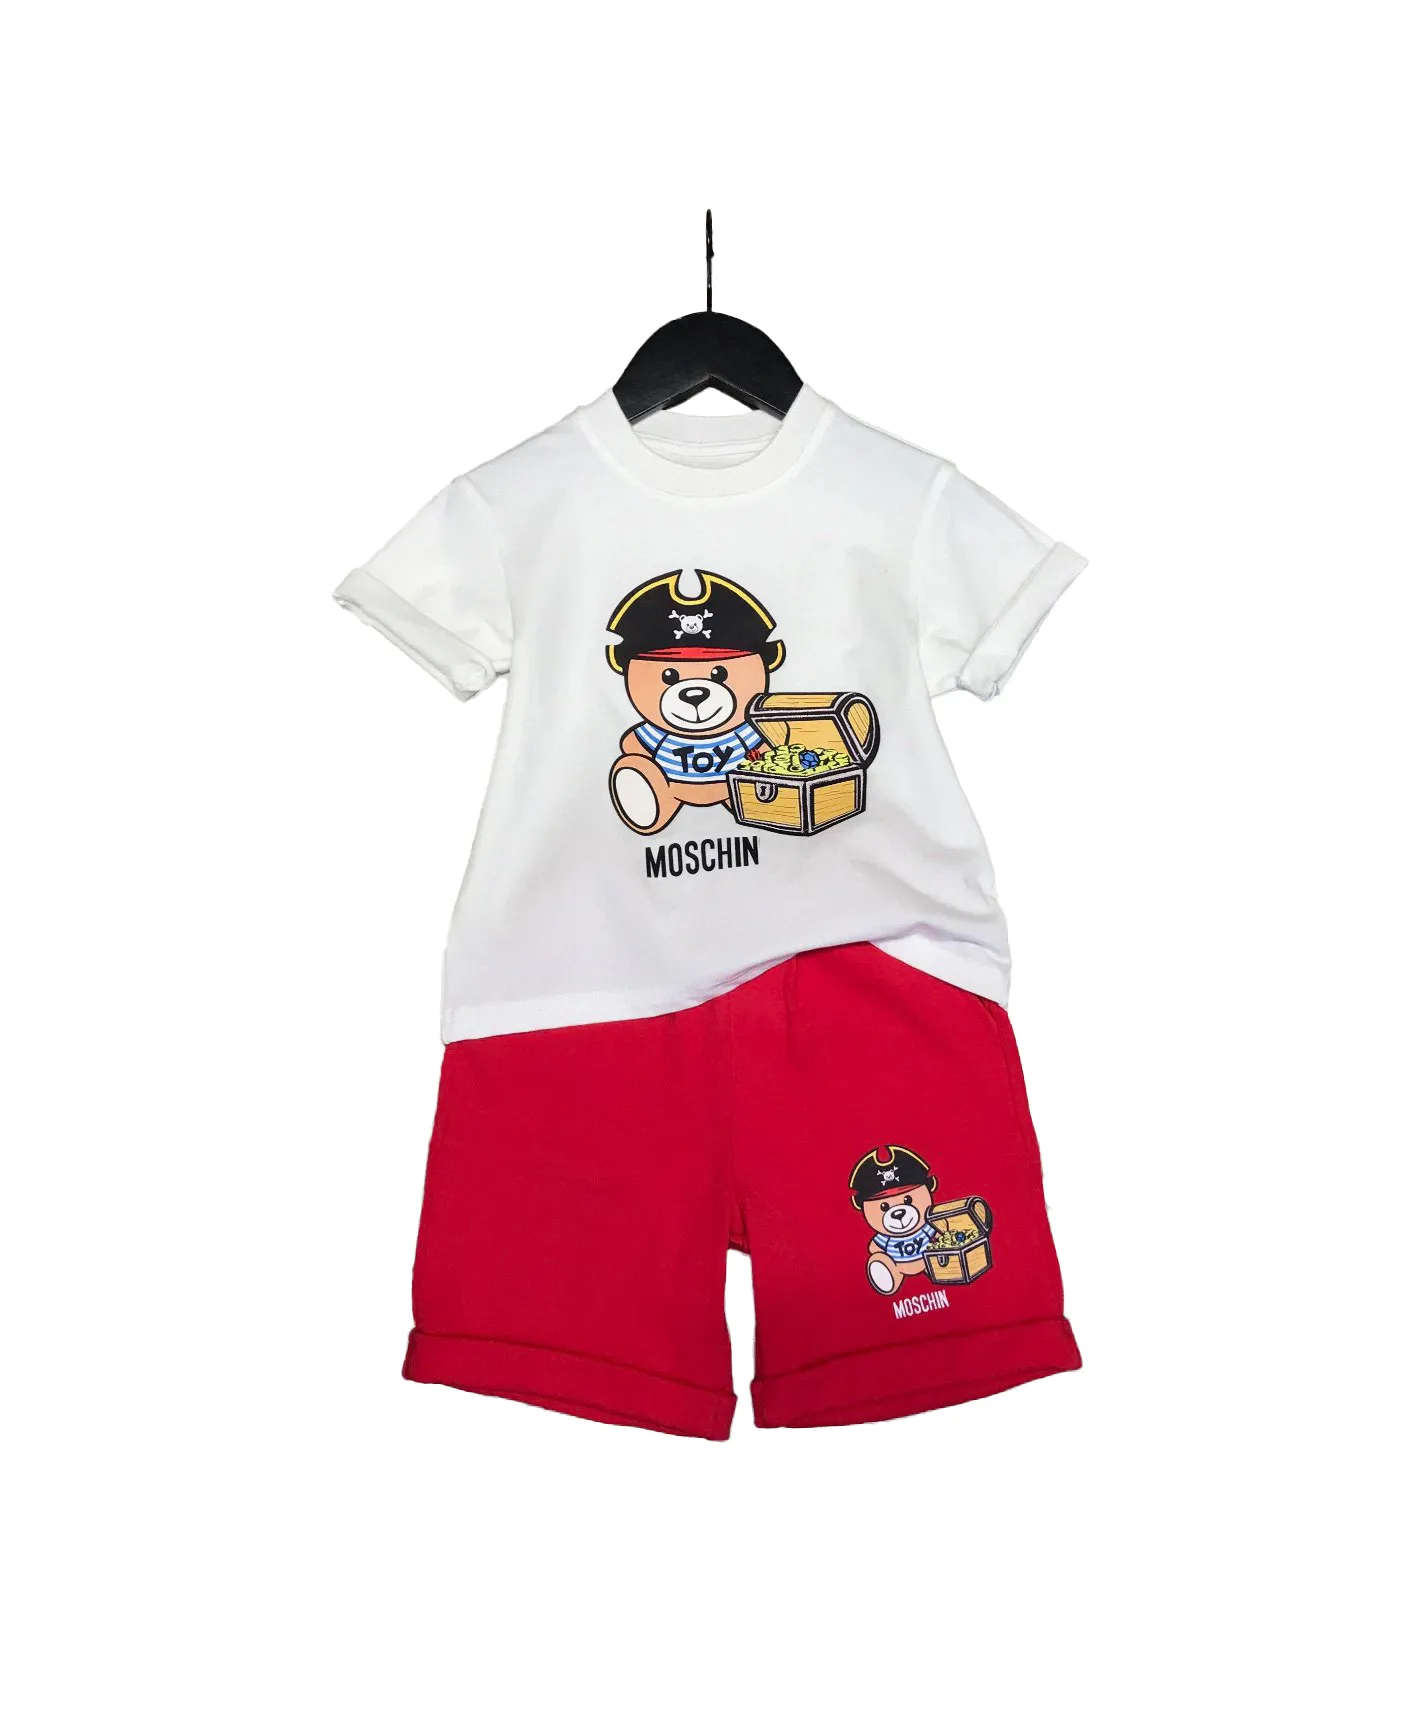 New Summer A Level Fabric Quality Branded Kids Cotton Cute Clothing Skin Care Children's Set